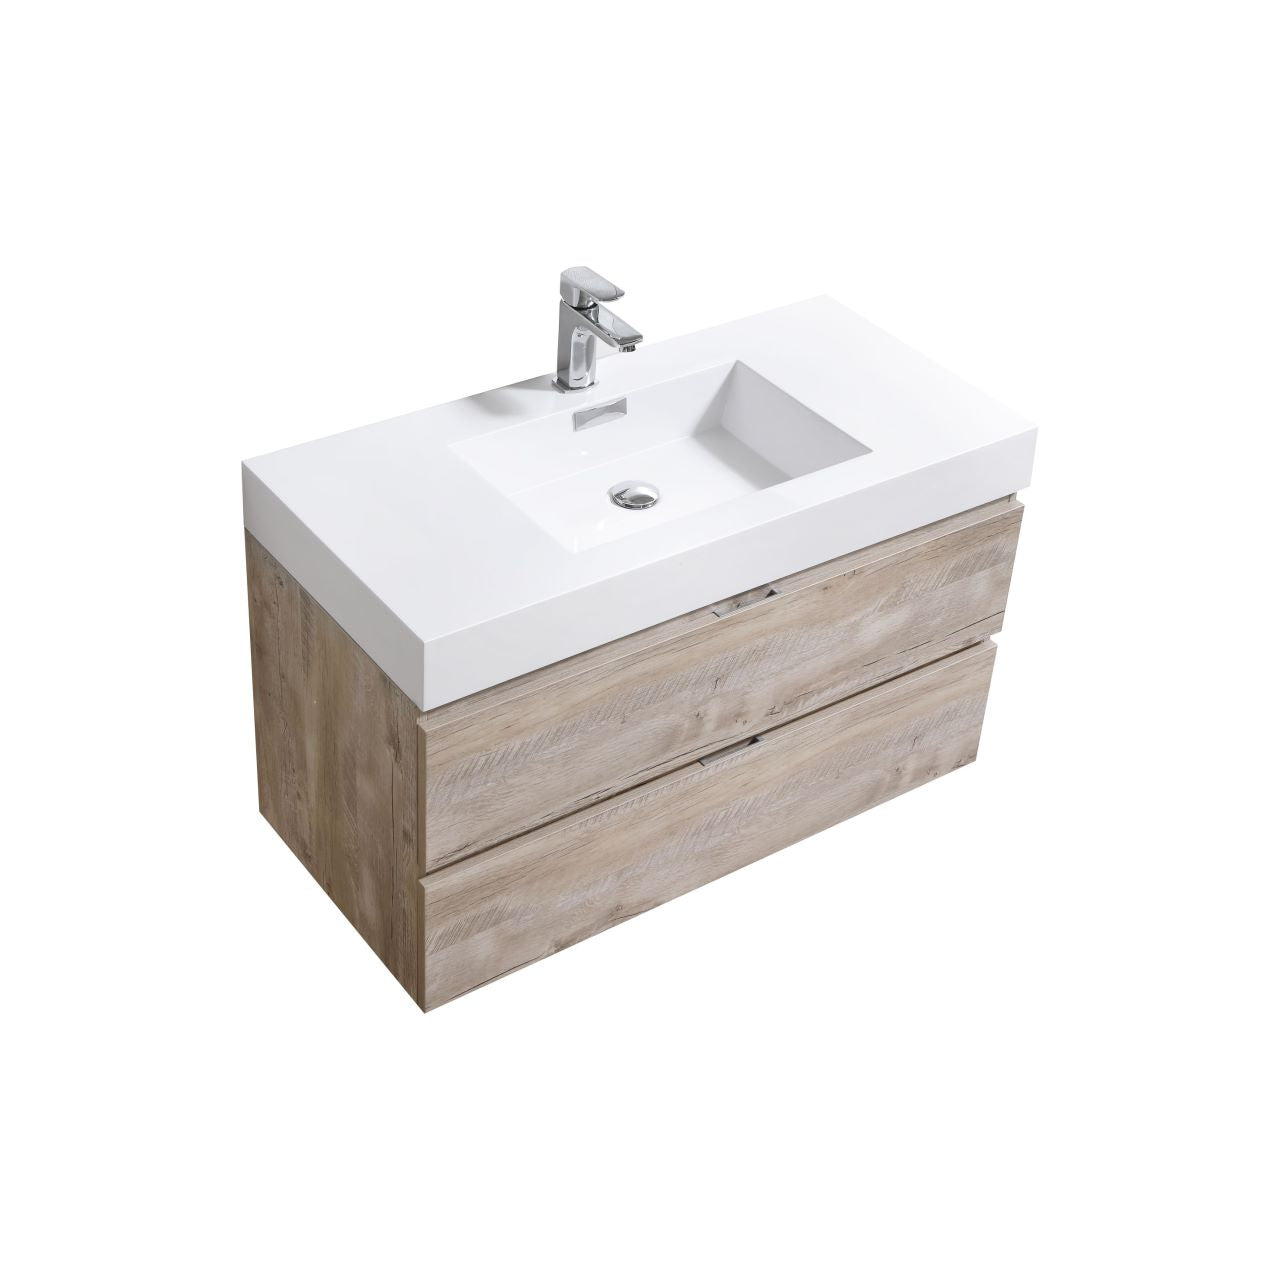 KUBEBATH Bliss BSL40-NW 40" Single Wall Mount Bathroom Vanity in Nature Wood with White Acrylic Composite, Integrated Sink, Angled View